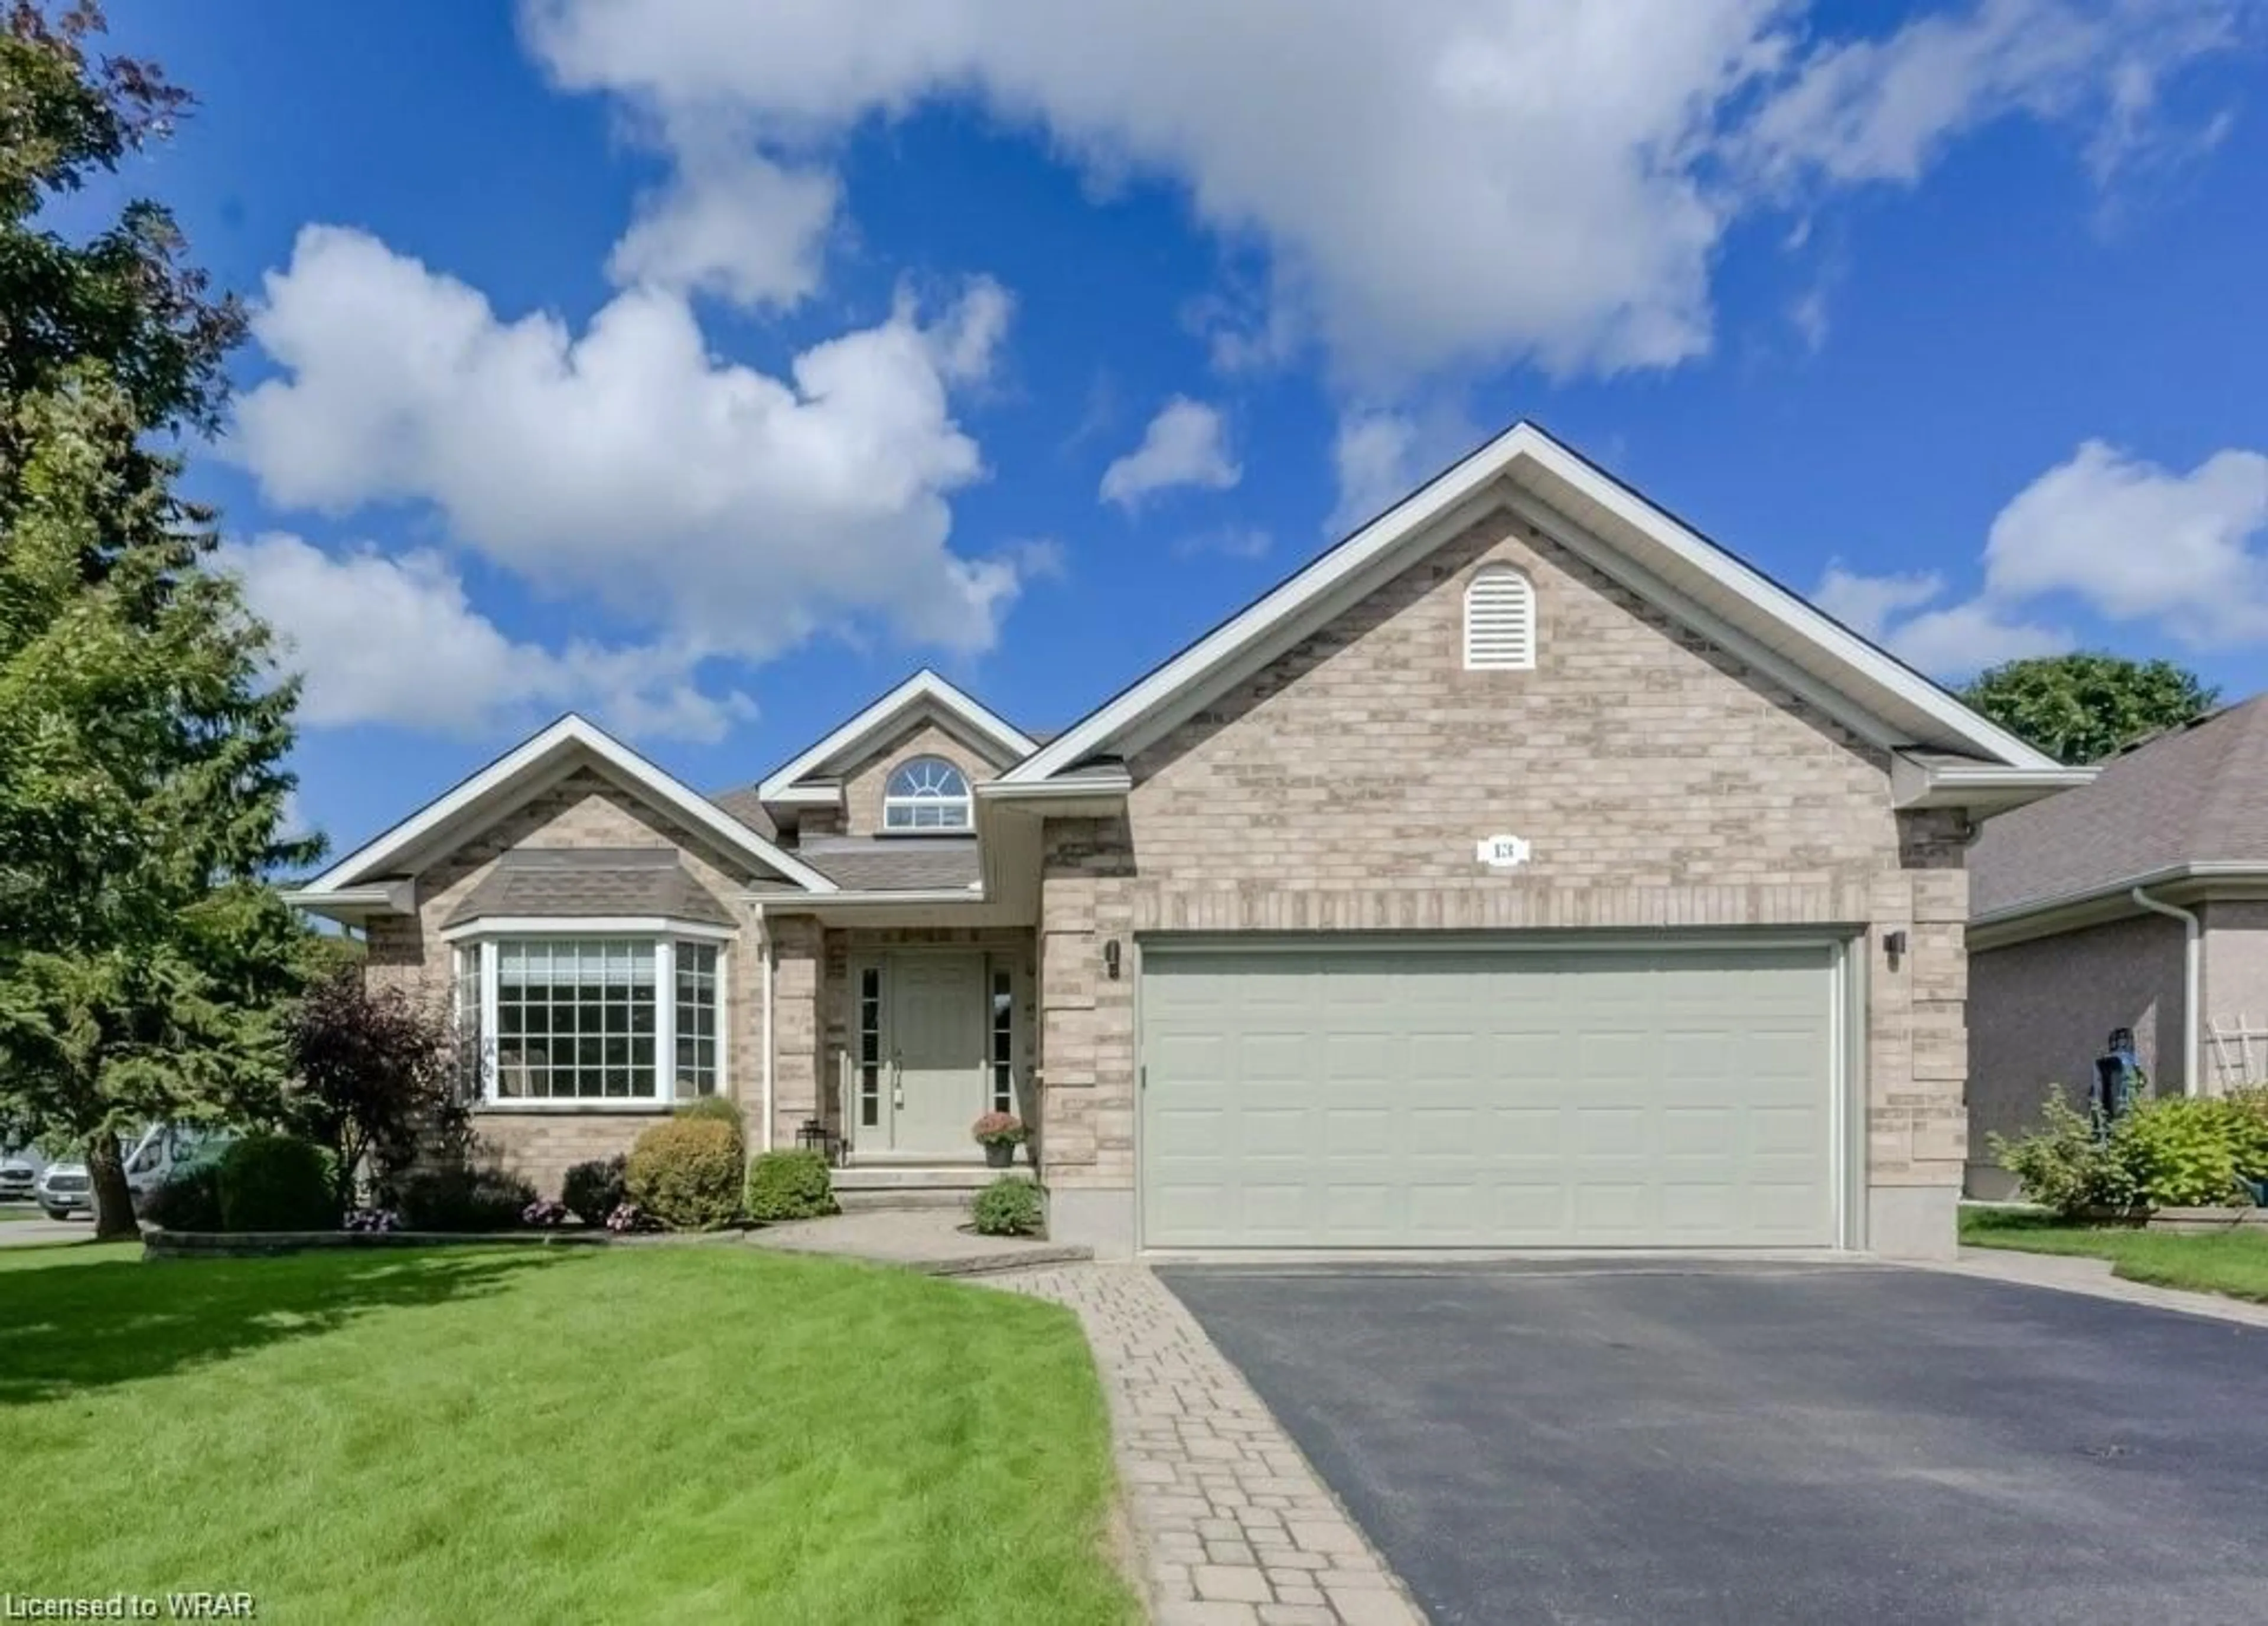 Home with brick exterior material for 13 Sun Valley Dr #182, Baden Ontario N3A 3P8